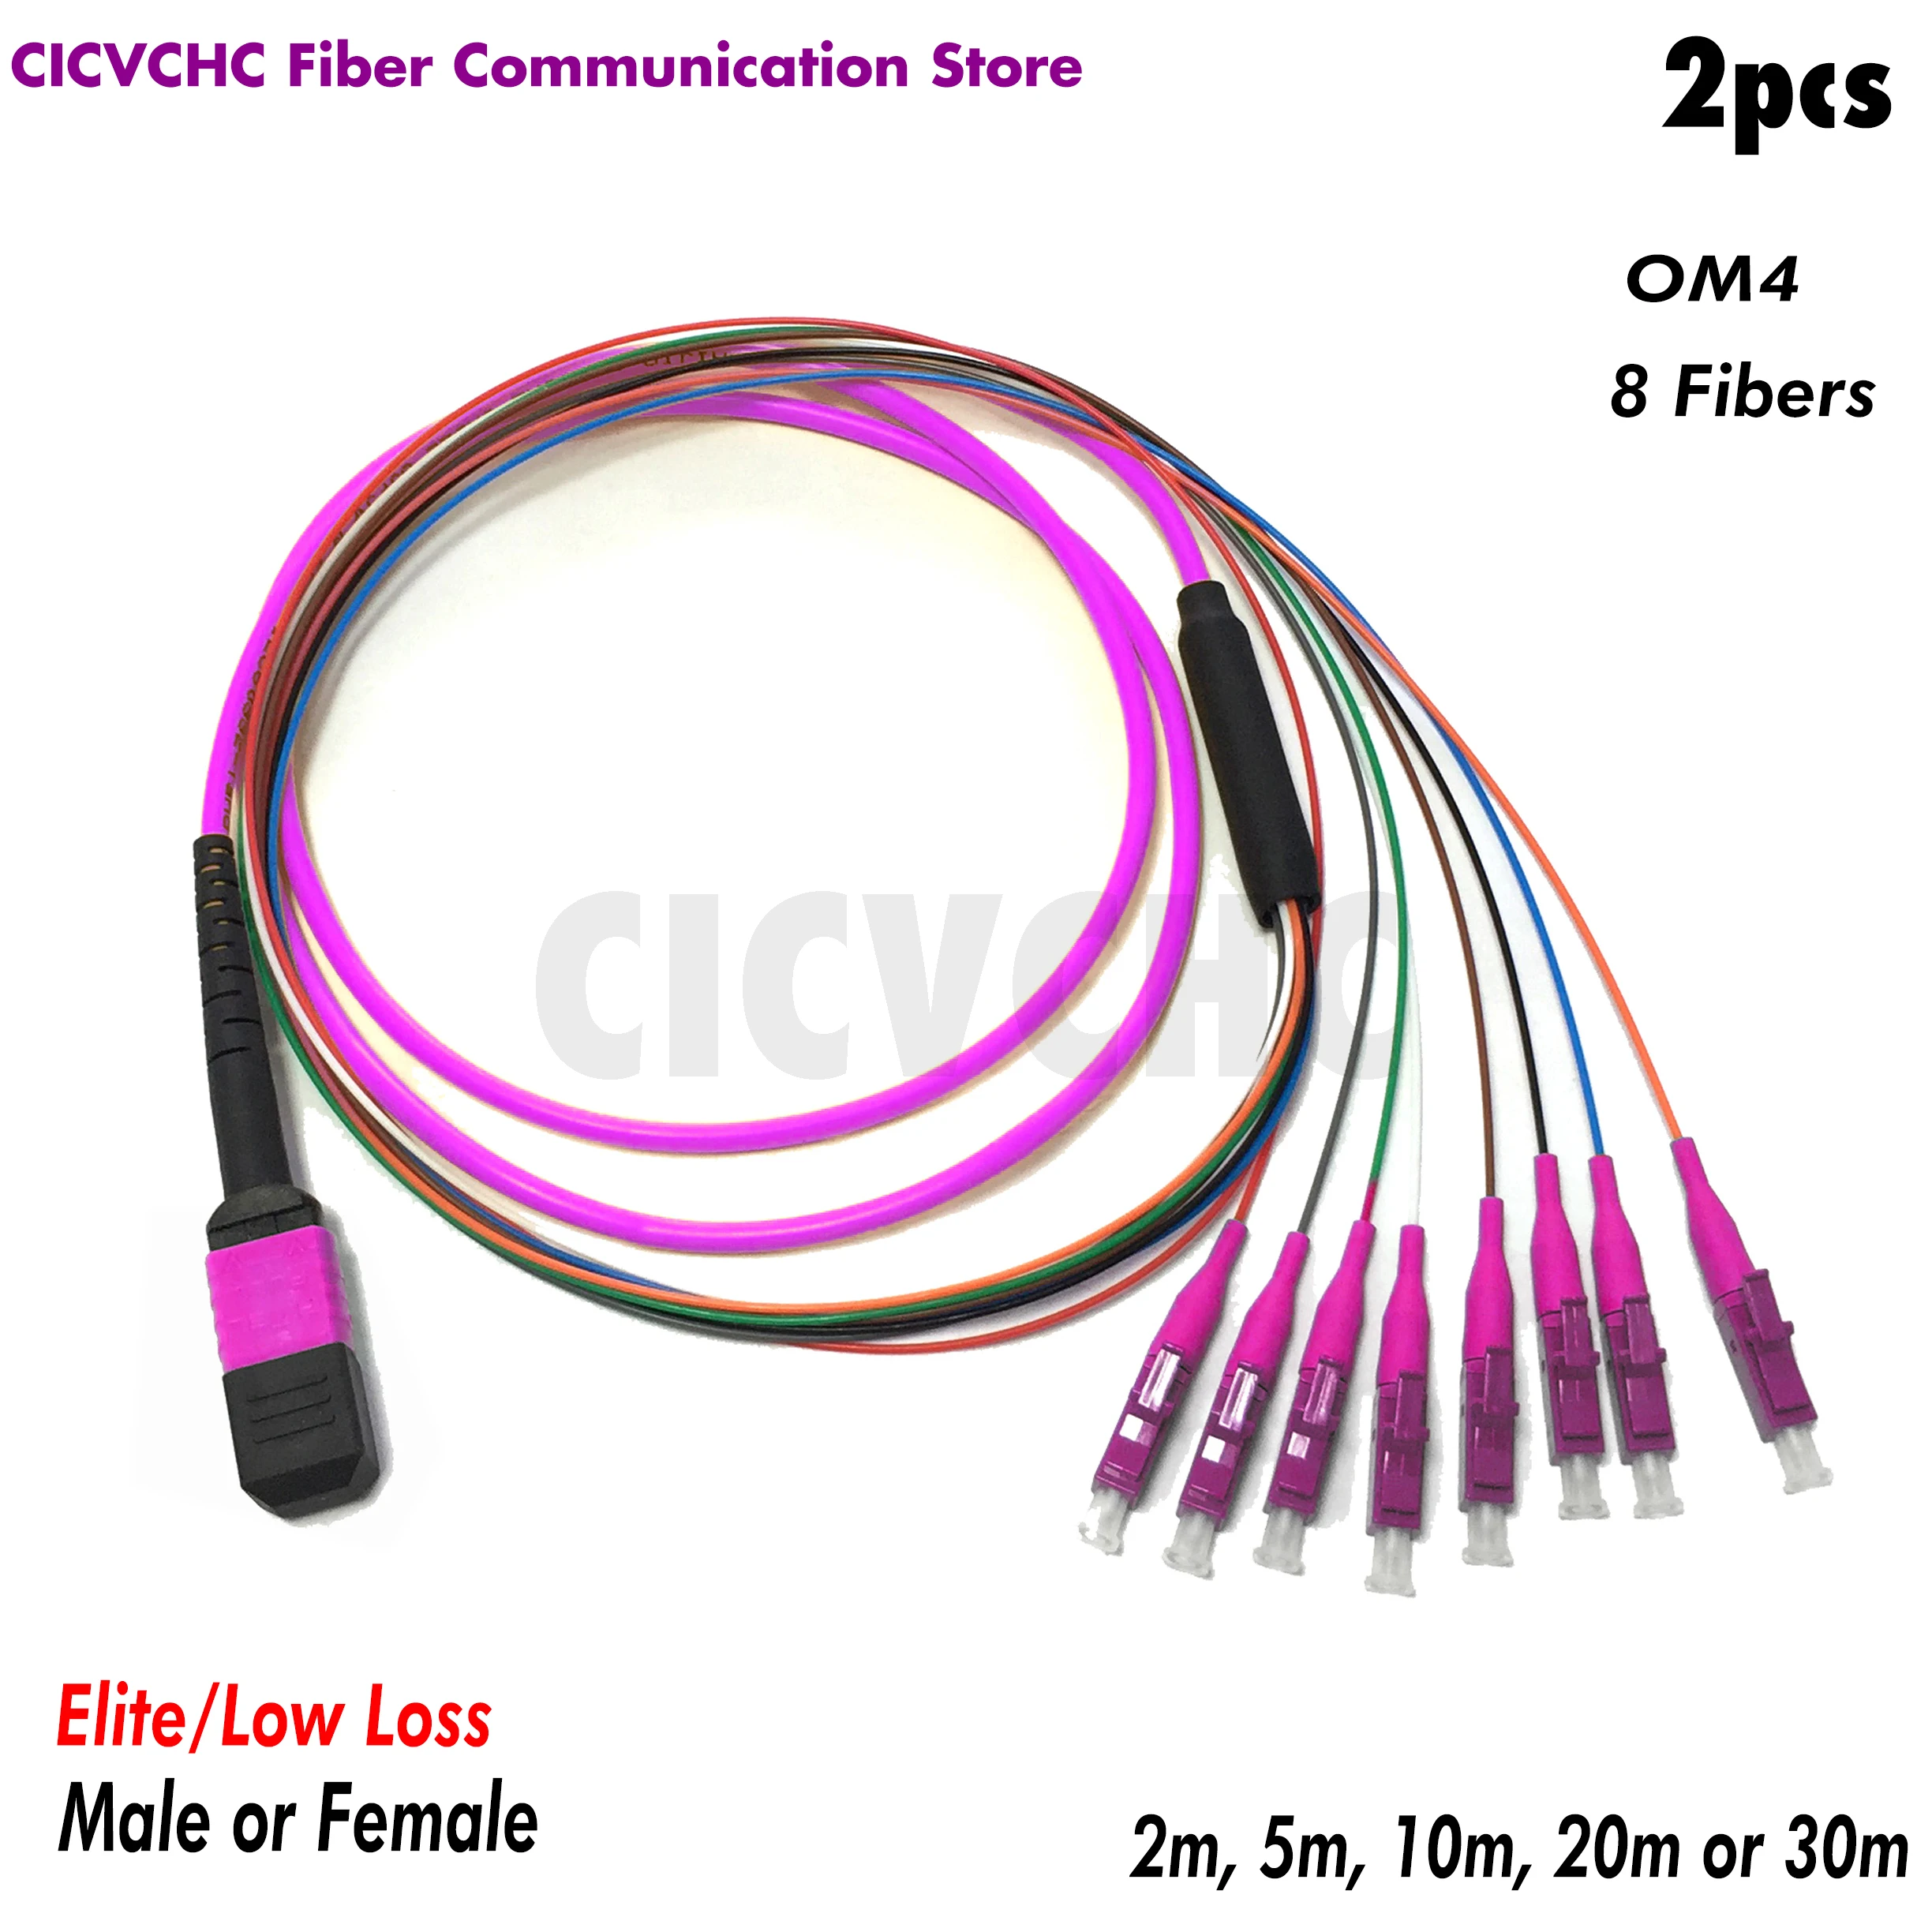 2pcs 12 fibers mpo upc fanout lc upc om4 elite low loss male female with 0 9mm 2m to 30m mpo assembly 2pcs 8 fibers-MPO/UPC Fanout LC/UPC -OM4-Elite/Low loss-Male/Female with 0.9mm-2m to 30m/MPO Assembly